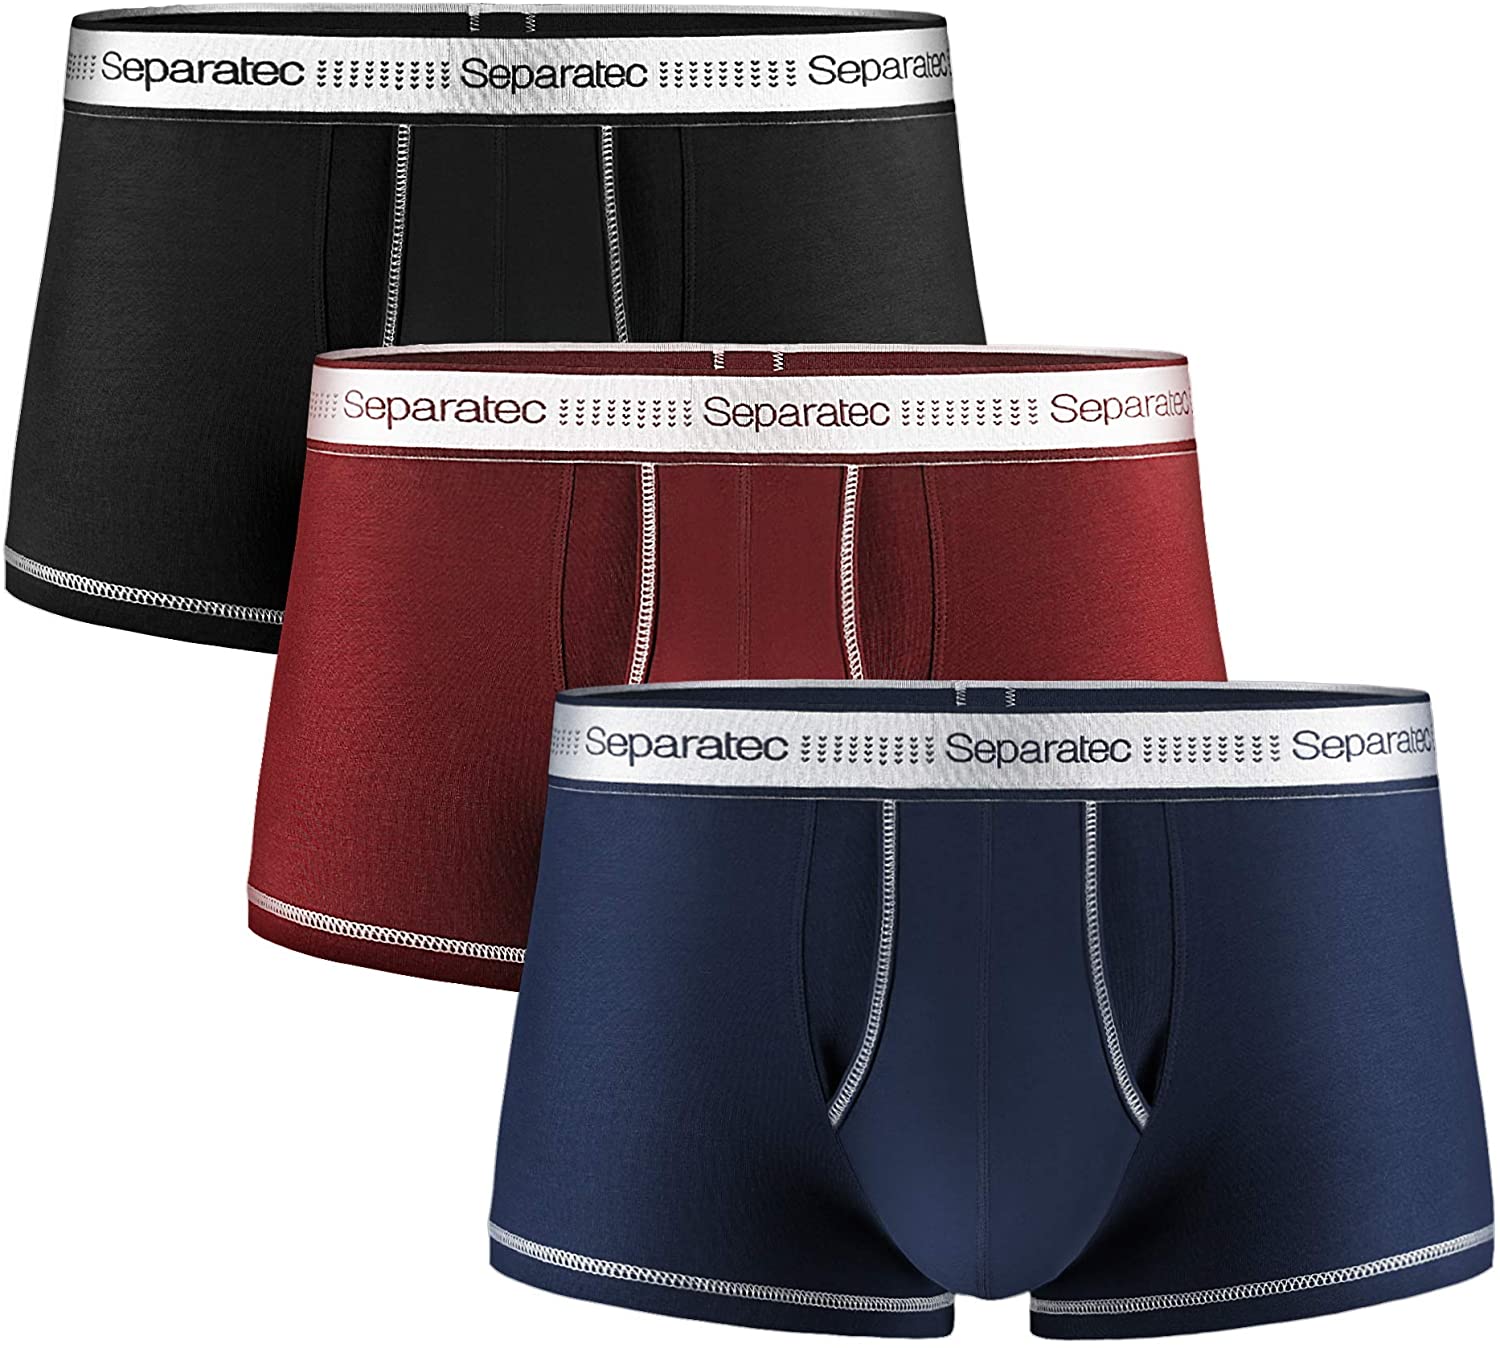 Separatec Mens Underwear Colorful Comfortable Soft Cotton Stretch Trunks 3 Pack 